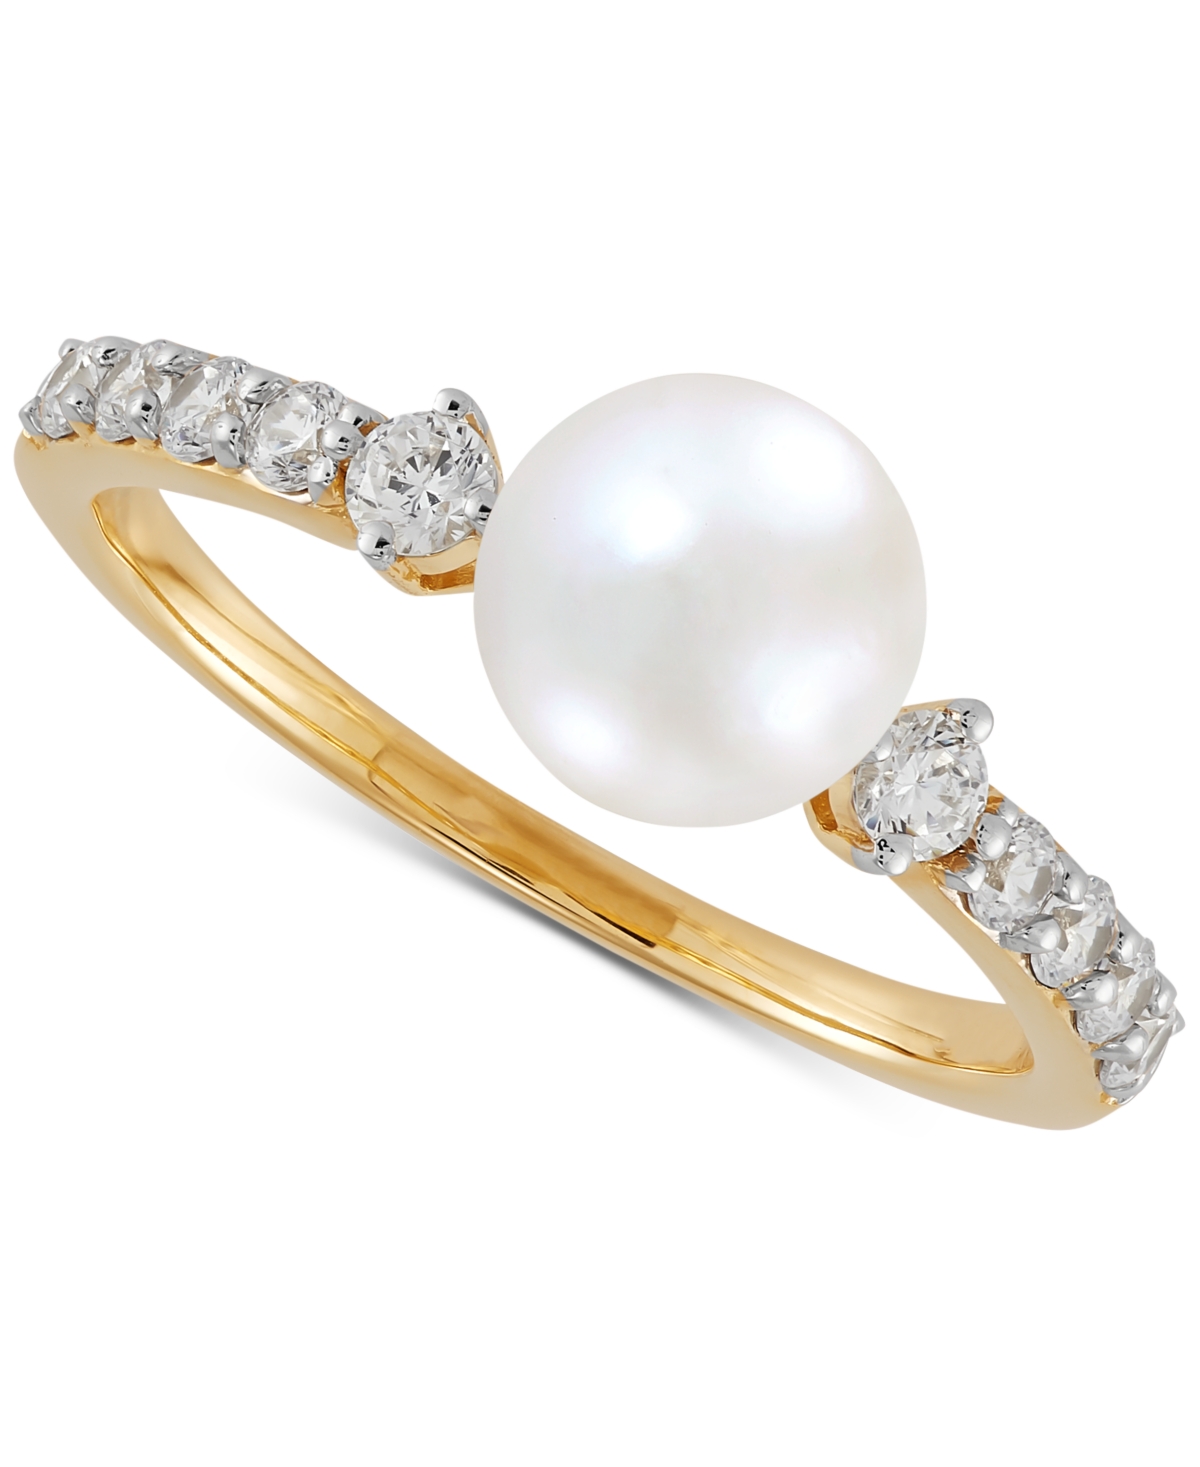 Honora Cultured Freshwater Pearl (7mm) & Diamond (1/3 ct. t.w.) Ring in 14k Gold (Also in 14k White Gold)